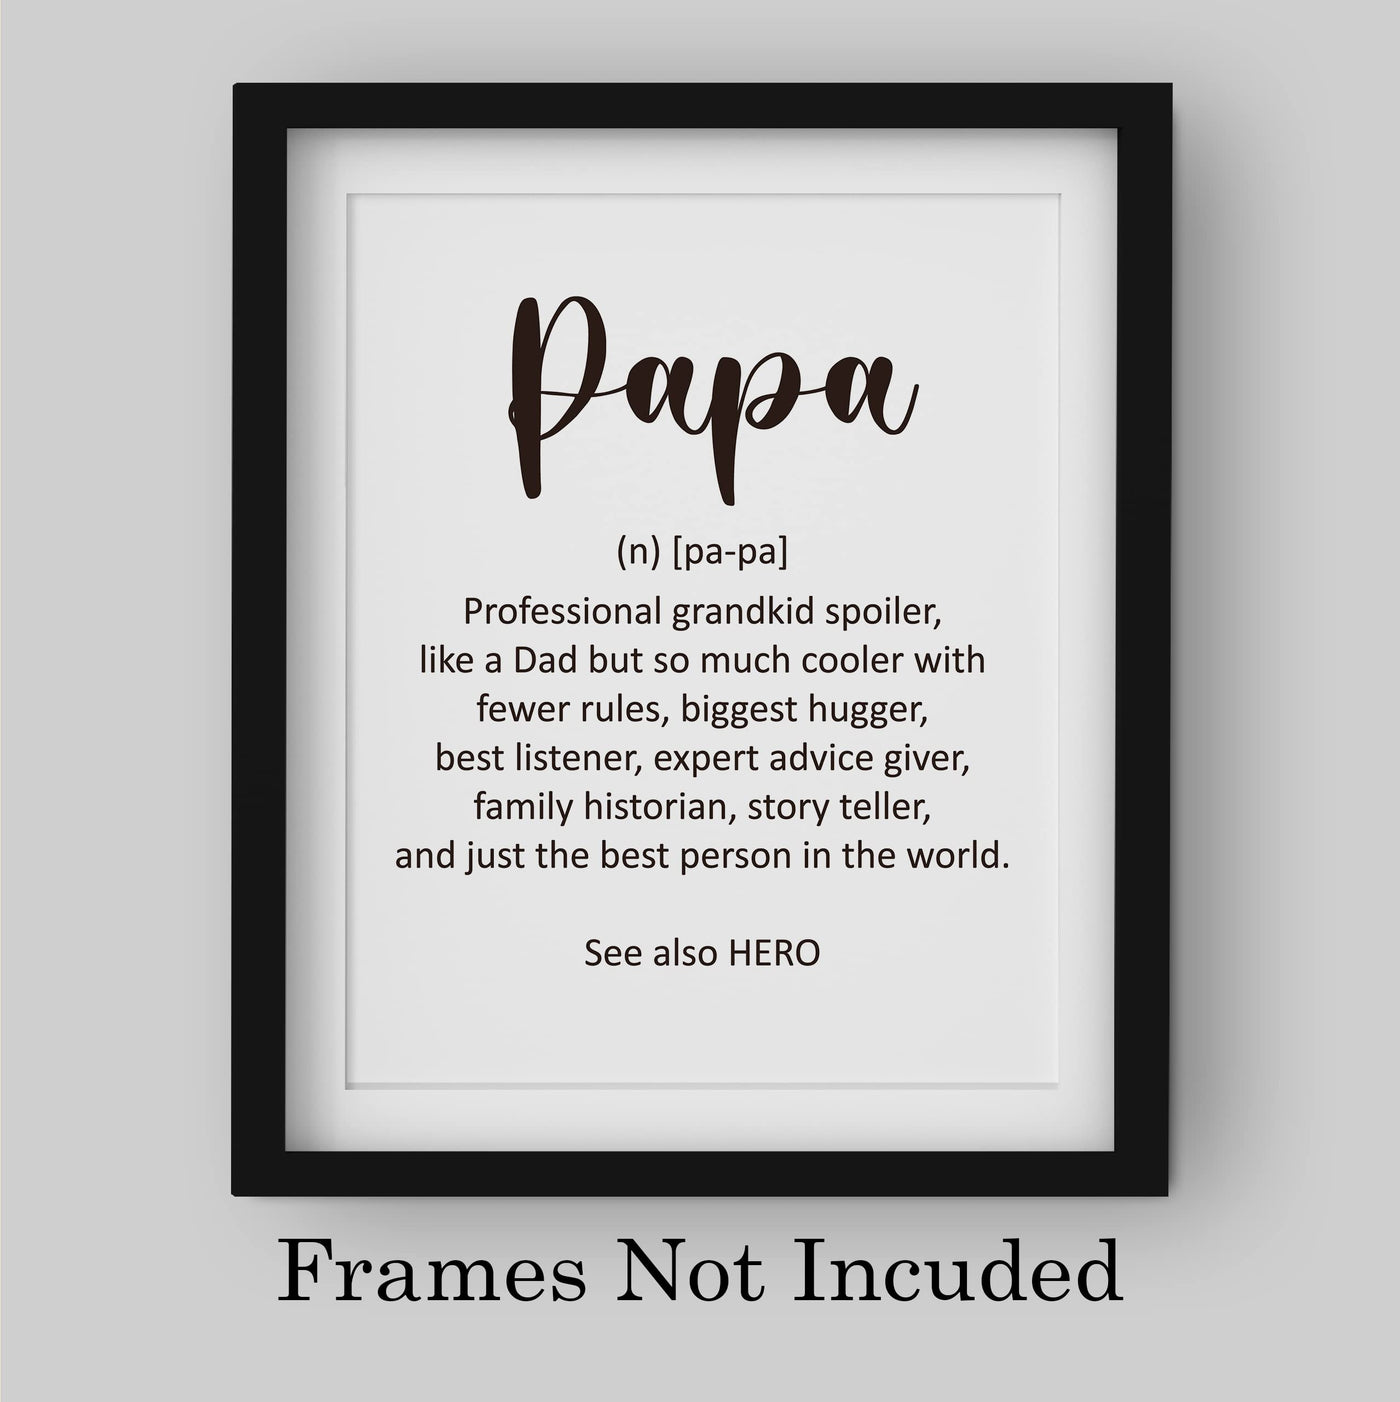 Papa-See Also Hero Inspirational Family Wall Decor Sign -8 x 10" Rustic Grandpa Print -Ready to Frame. Funny Decor for Home-Office-Family Room-Grandparents. Great Gift for All Grandpas & Papas!